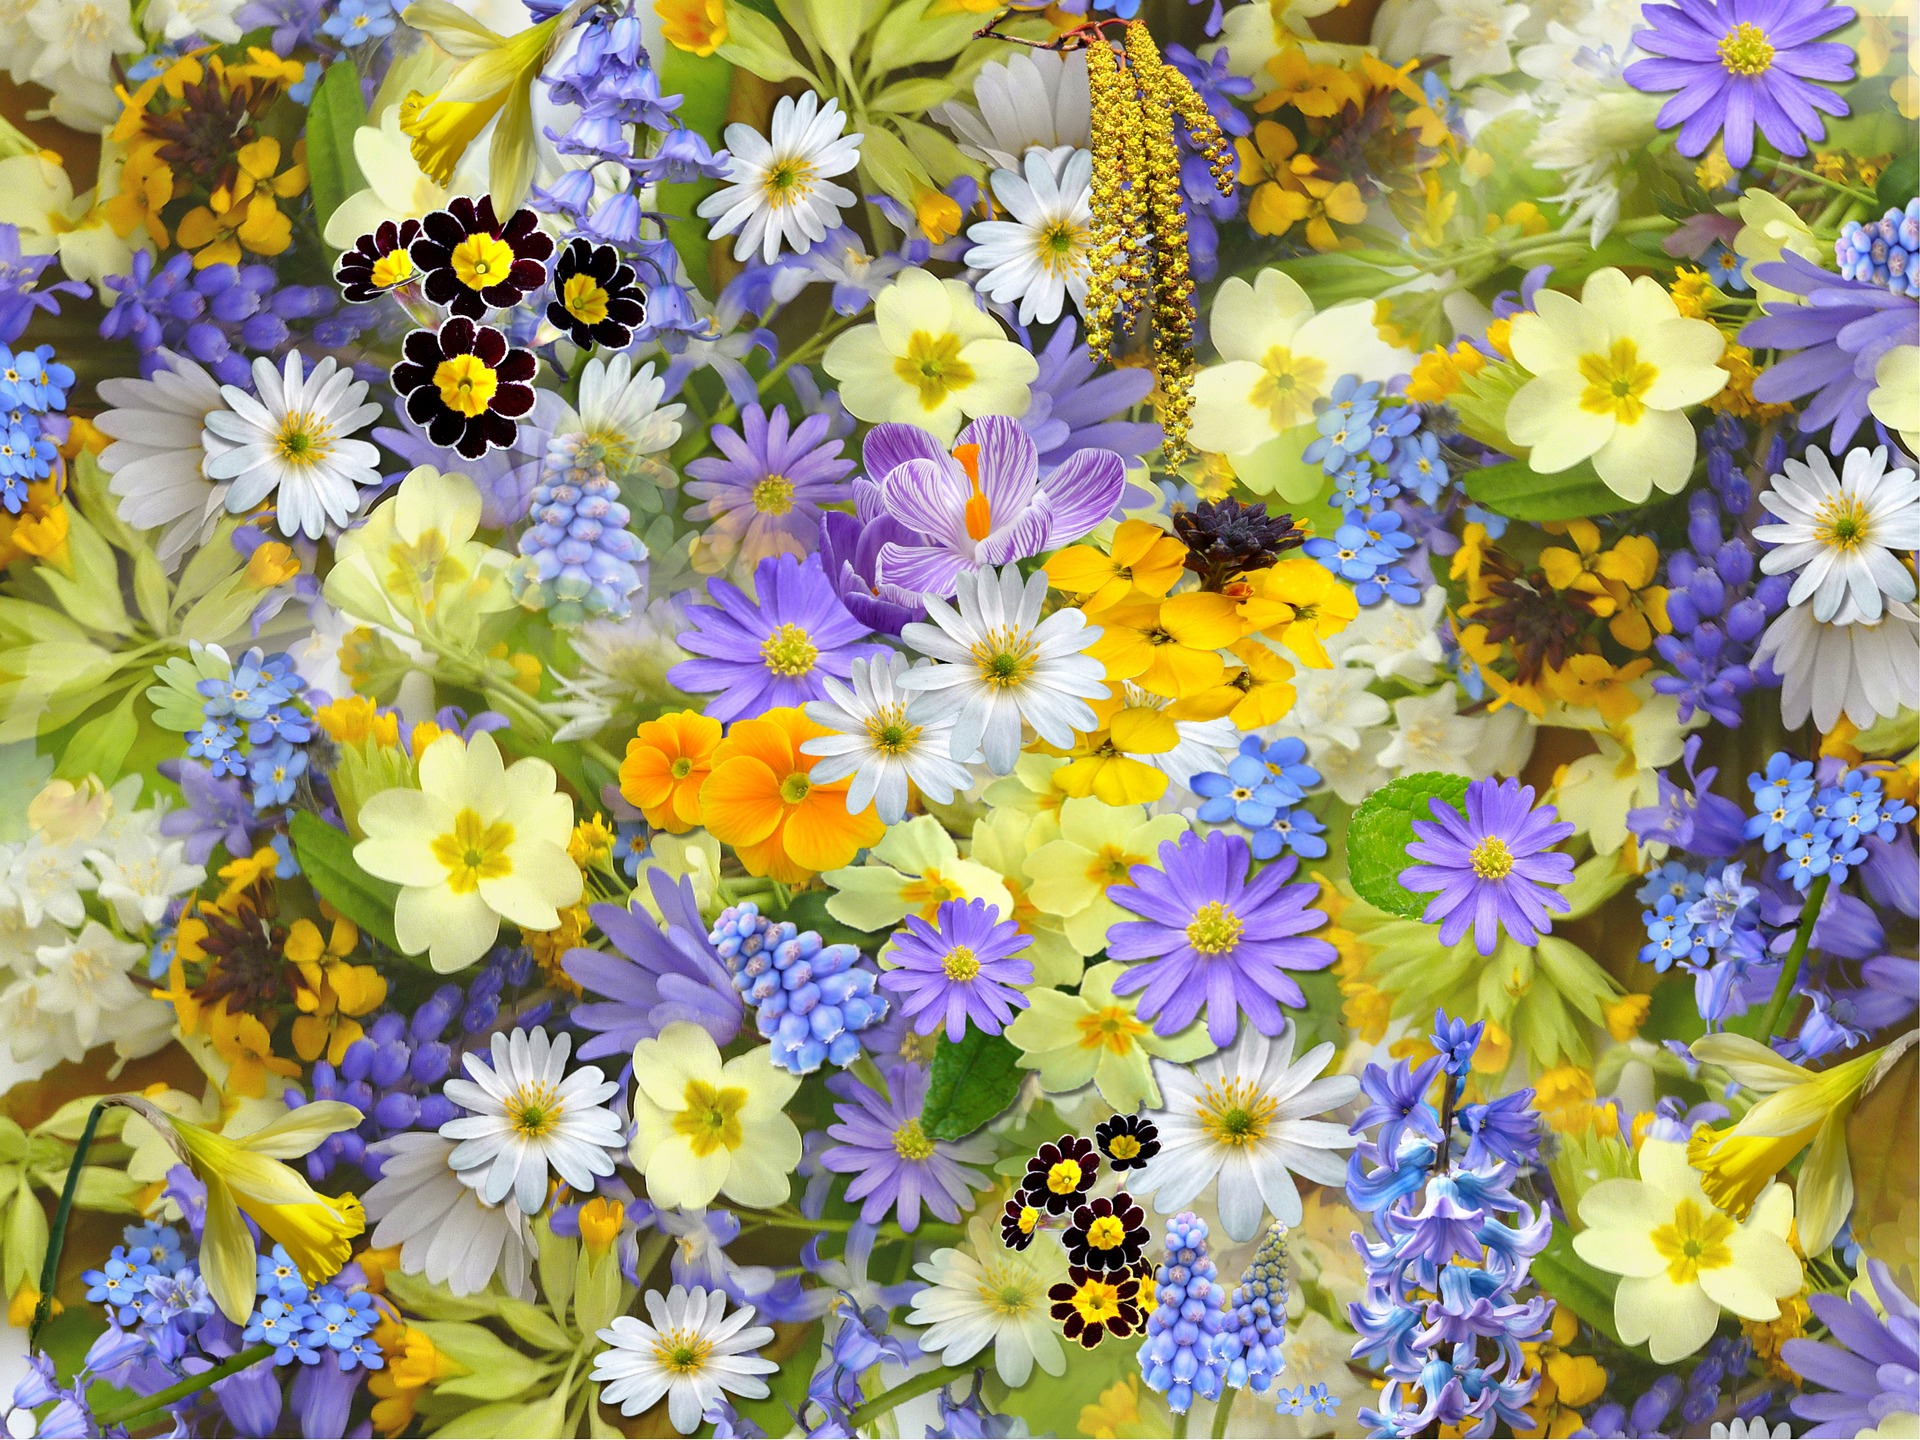 A closeup of yellow and purple flowers